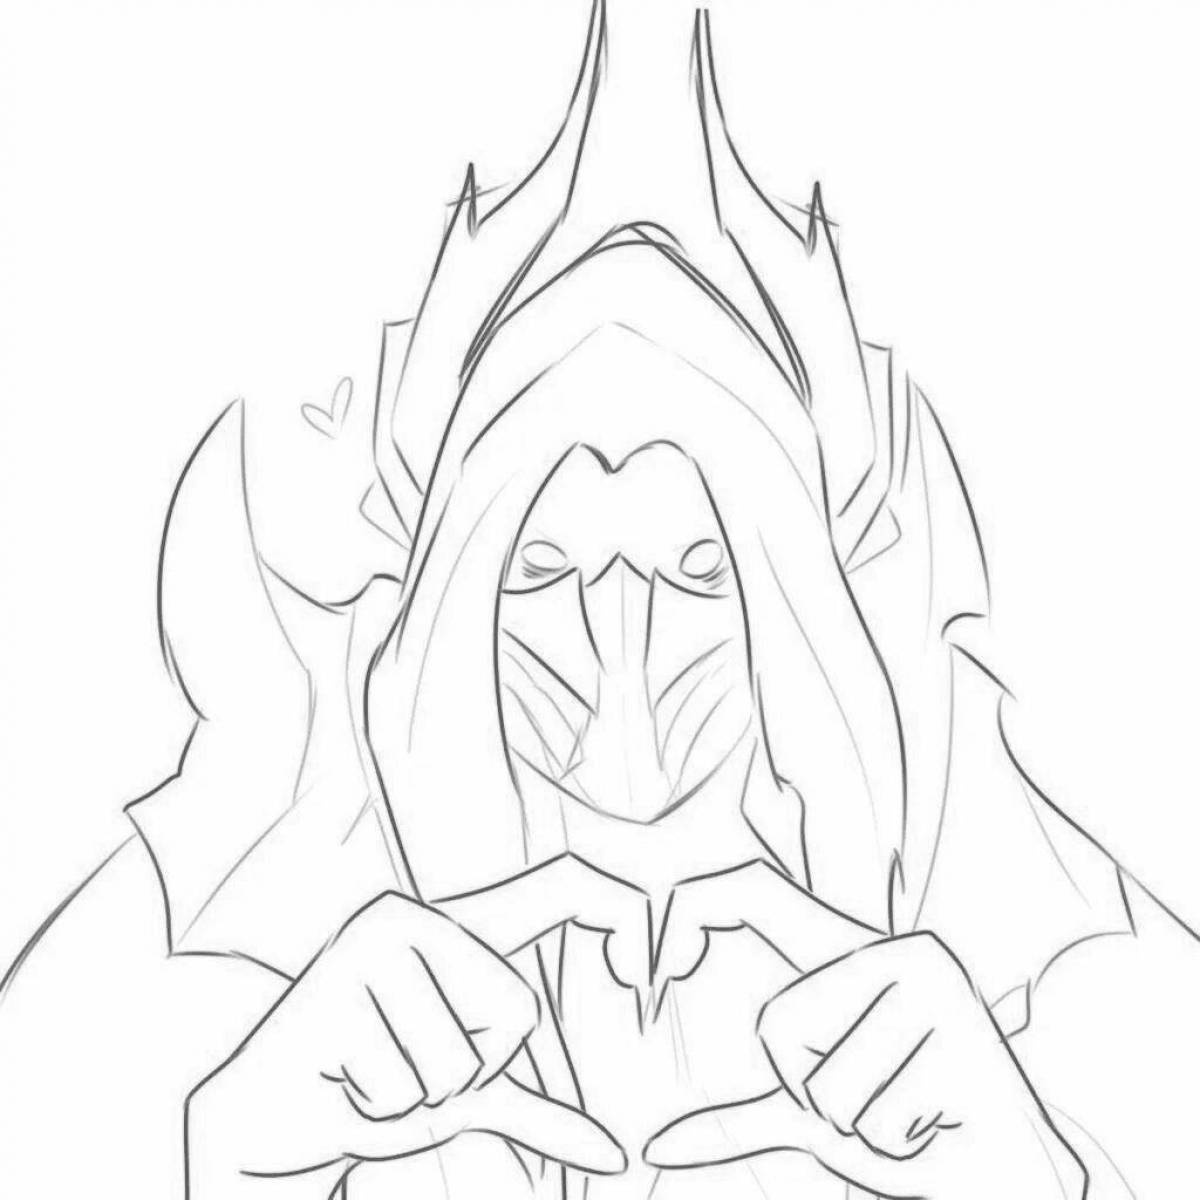 Serendipitous invoker coloring page